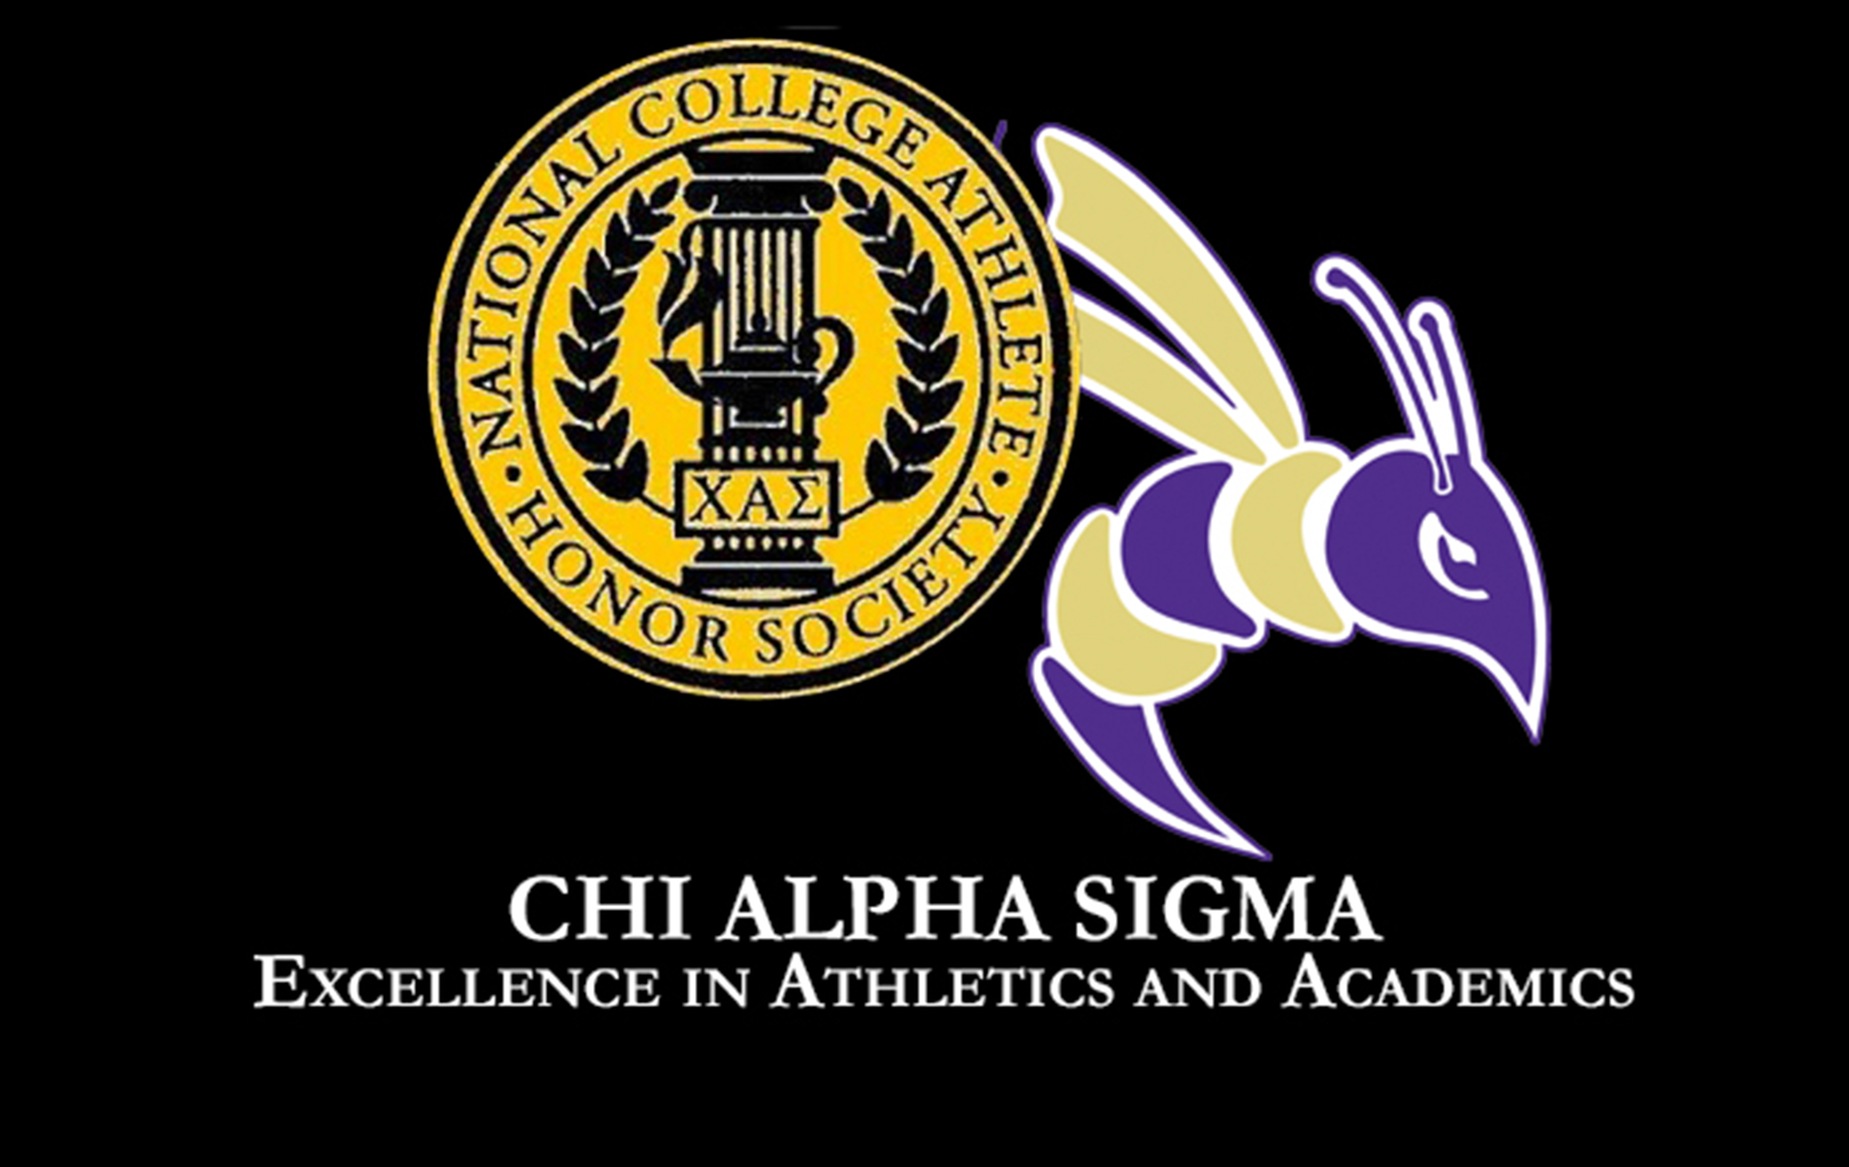 Defiance has 46 Student-Athletes Selected Chi Alpha Sigma